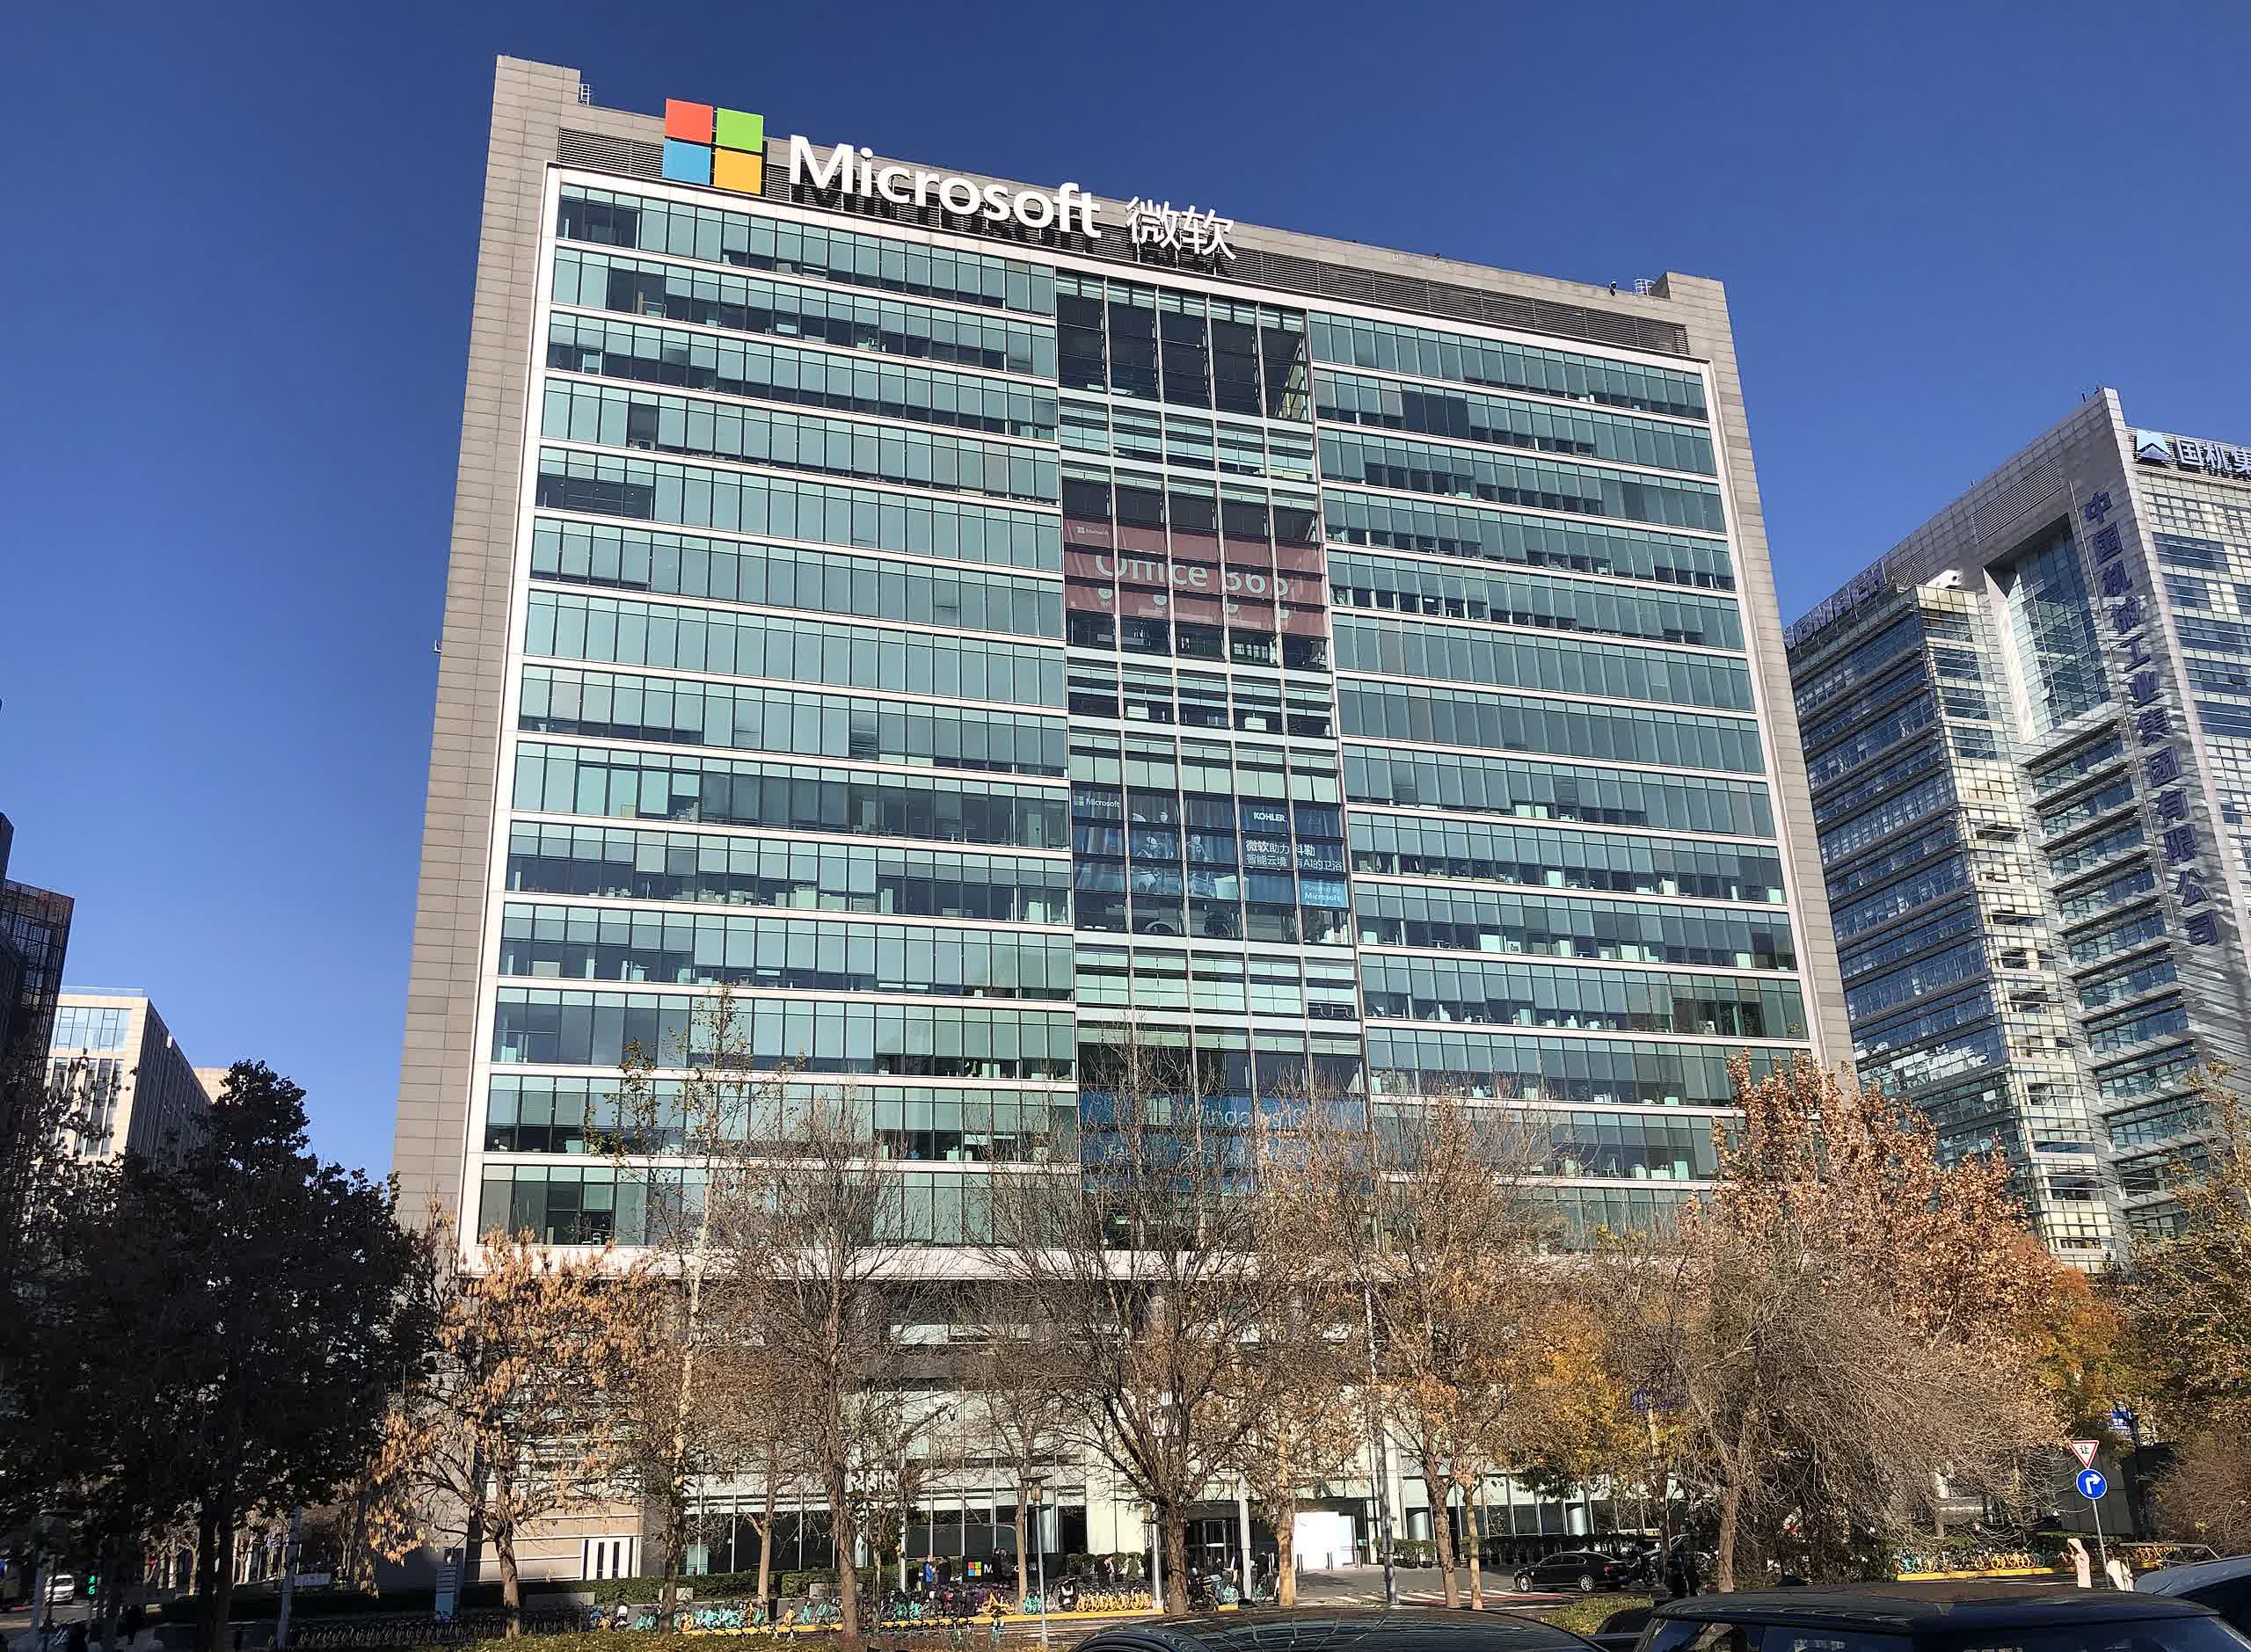 Microsoft is expanding in China with more jobs and upgrades despite rising international tensions